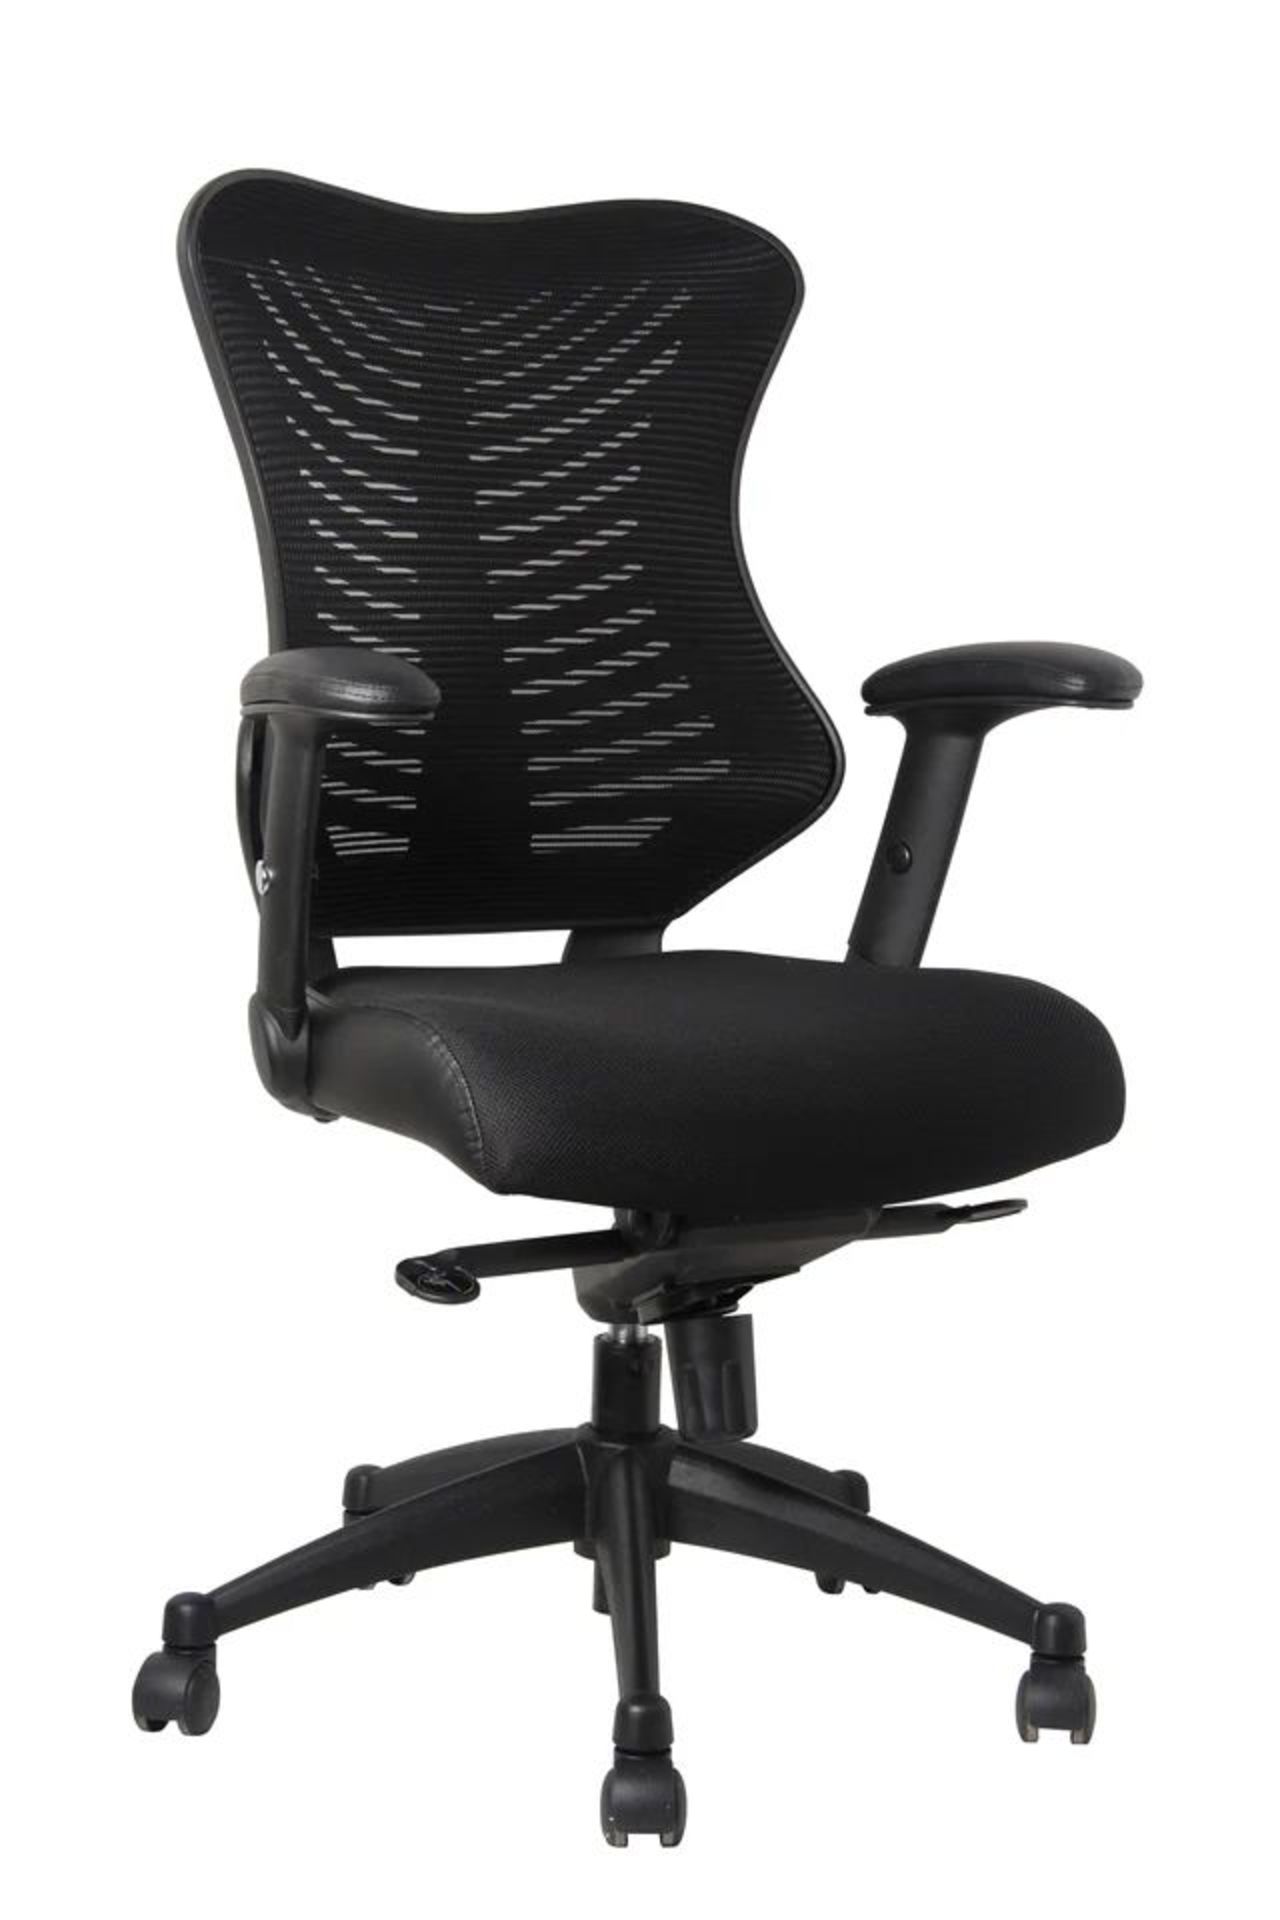 BRAND NEW OFFICE INTERIORS MESH SPINE BLACK LUXURY OFFICE CHAIR RRP £219 R11-15